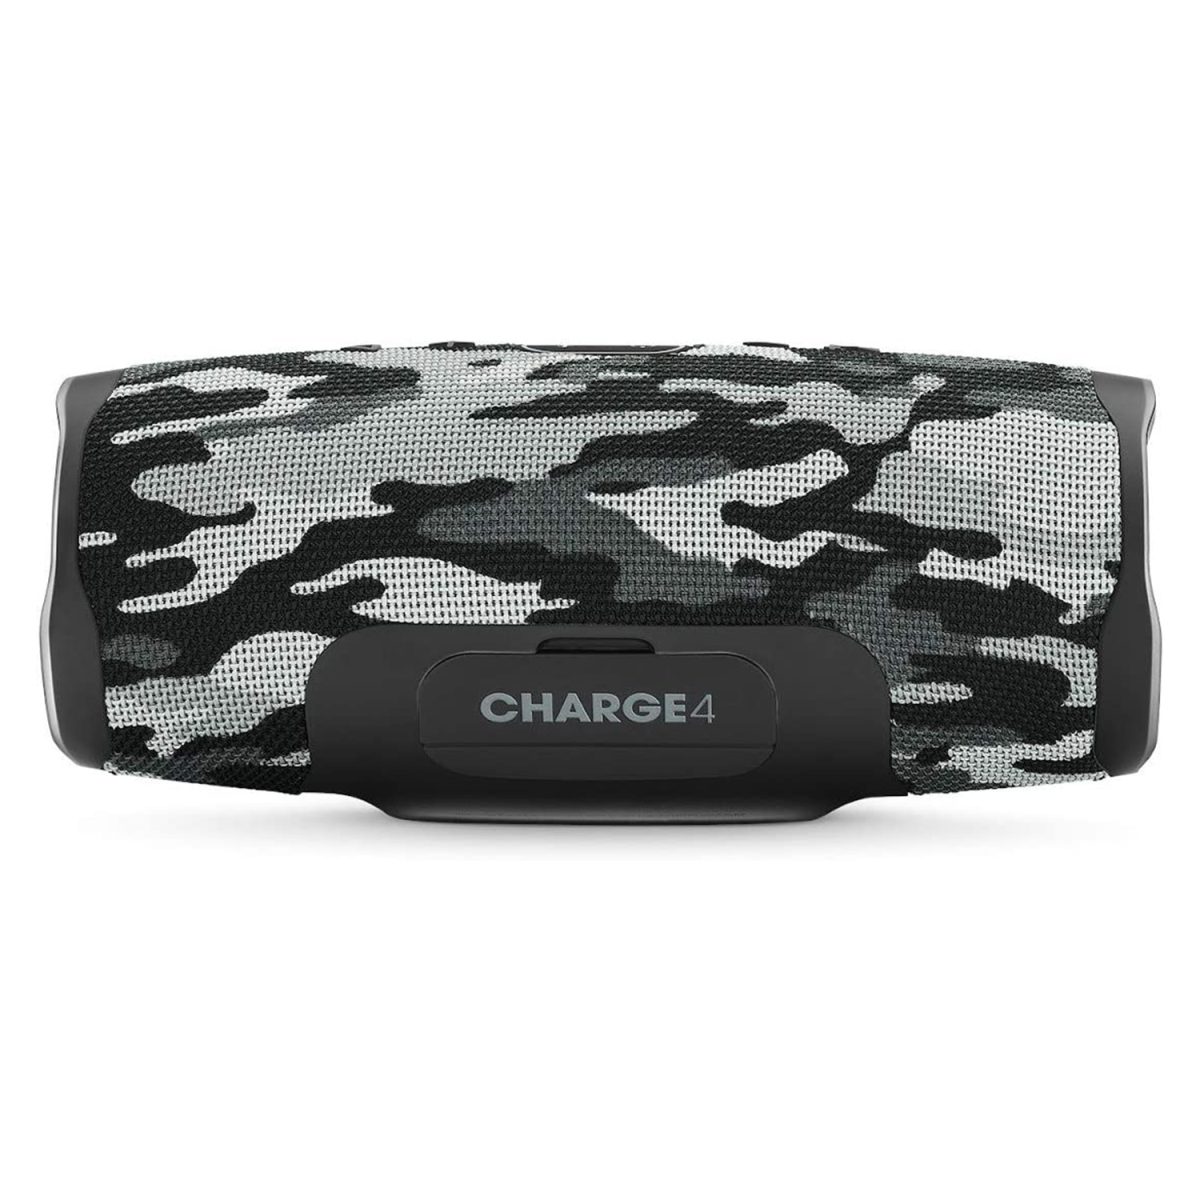 JBL Charge 4 Portable Bluetooth Speaker - Black&White Camouflage 2